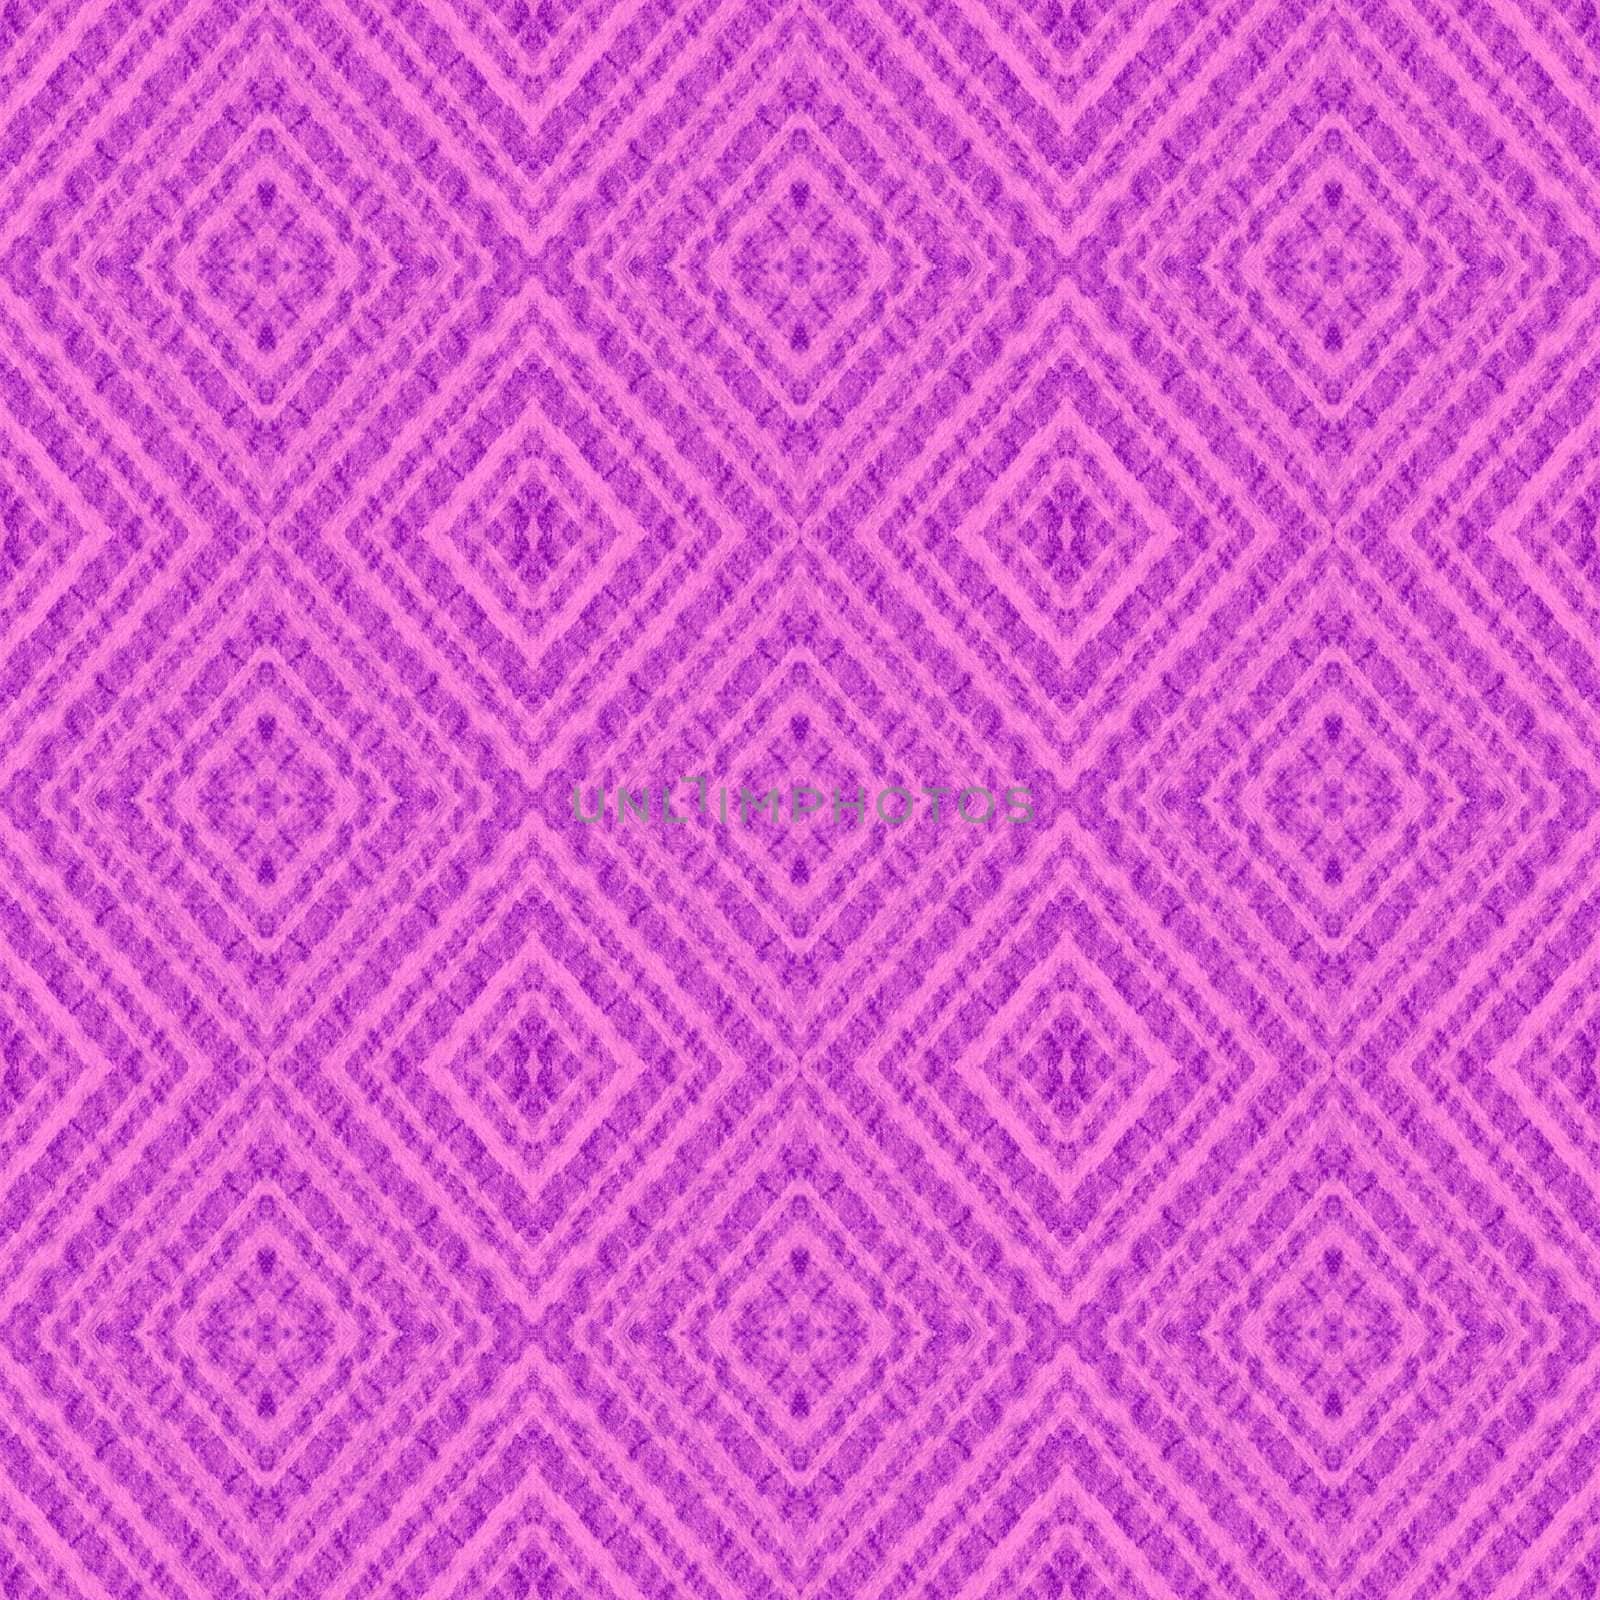 Seamless Tillable Woven Background Pattern by Nonboe